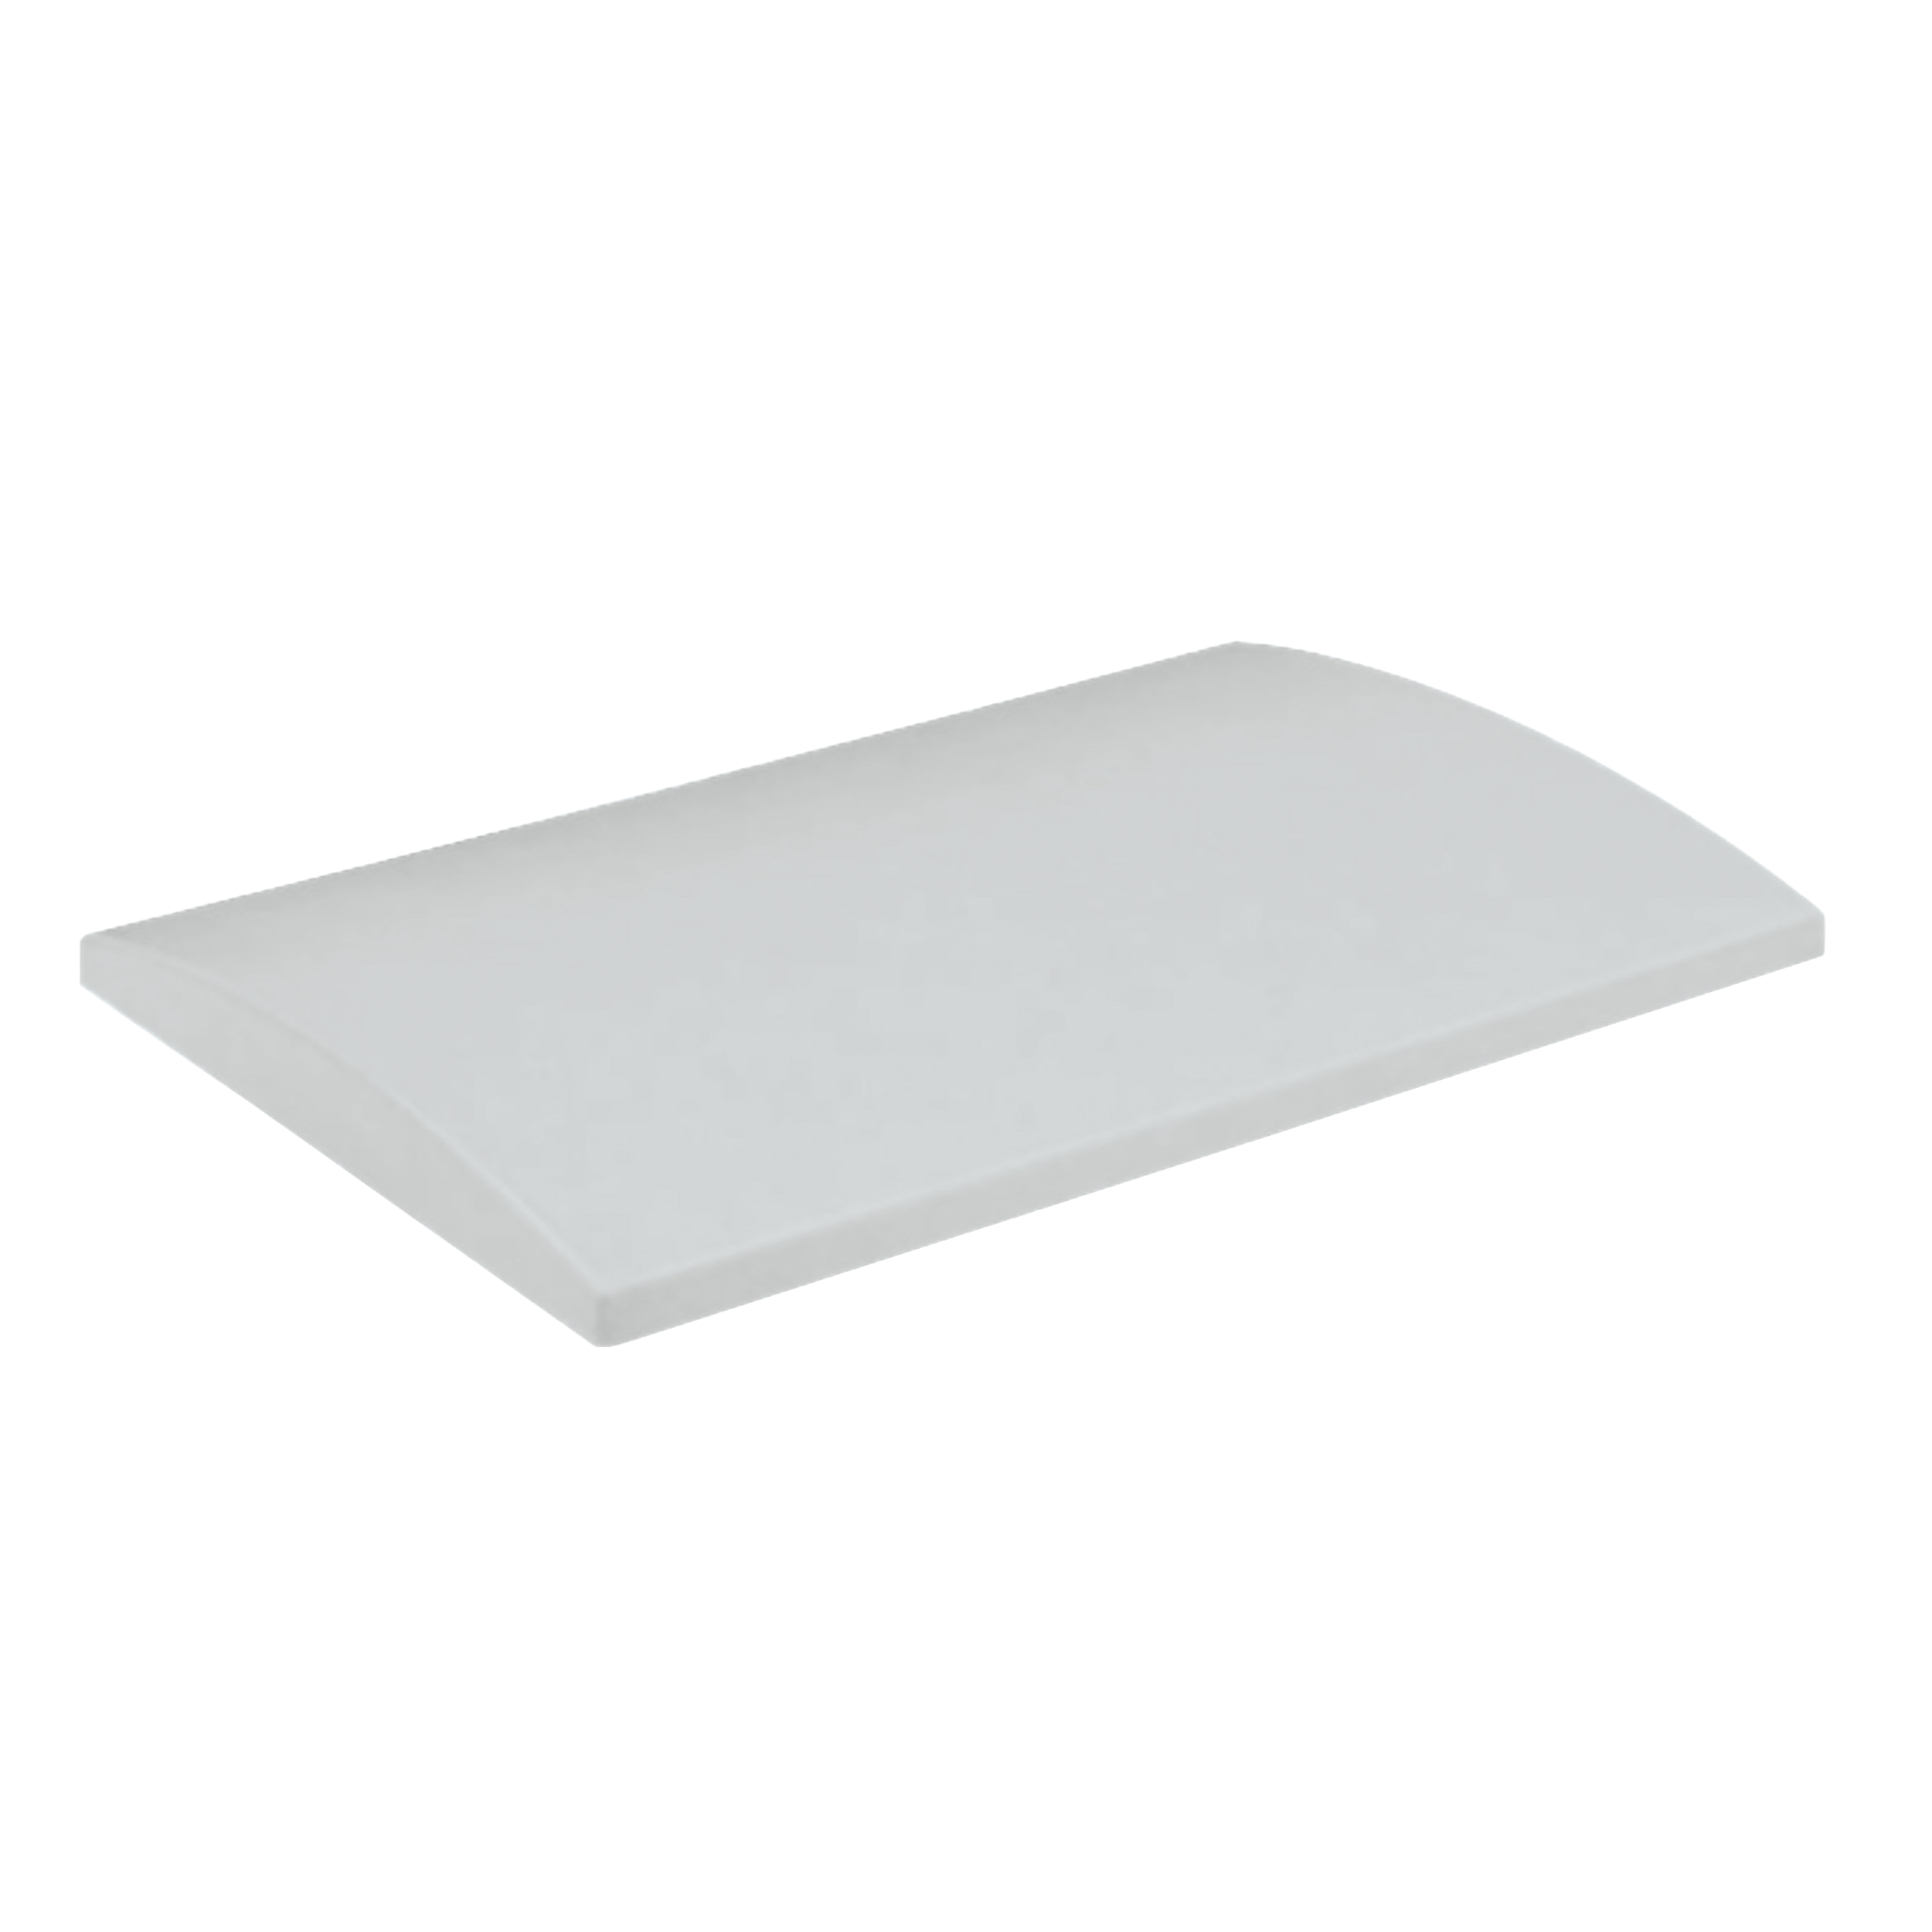 7035 500x320 canopy for PLA(Z)